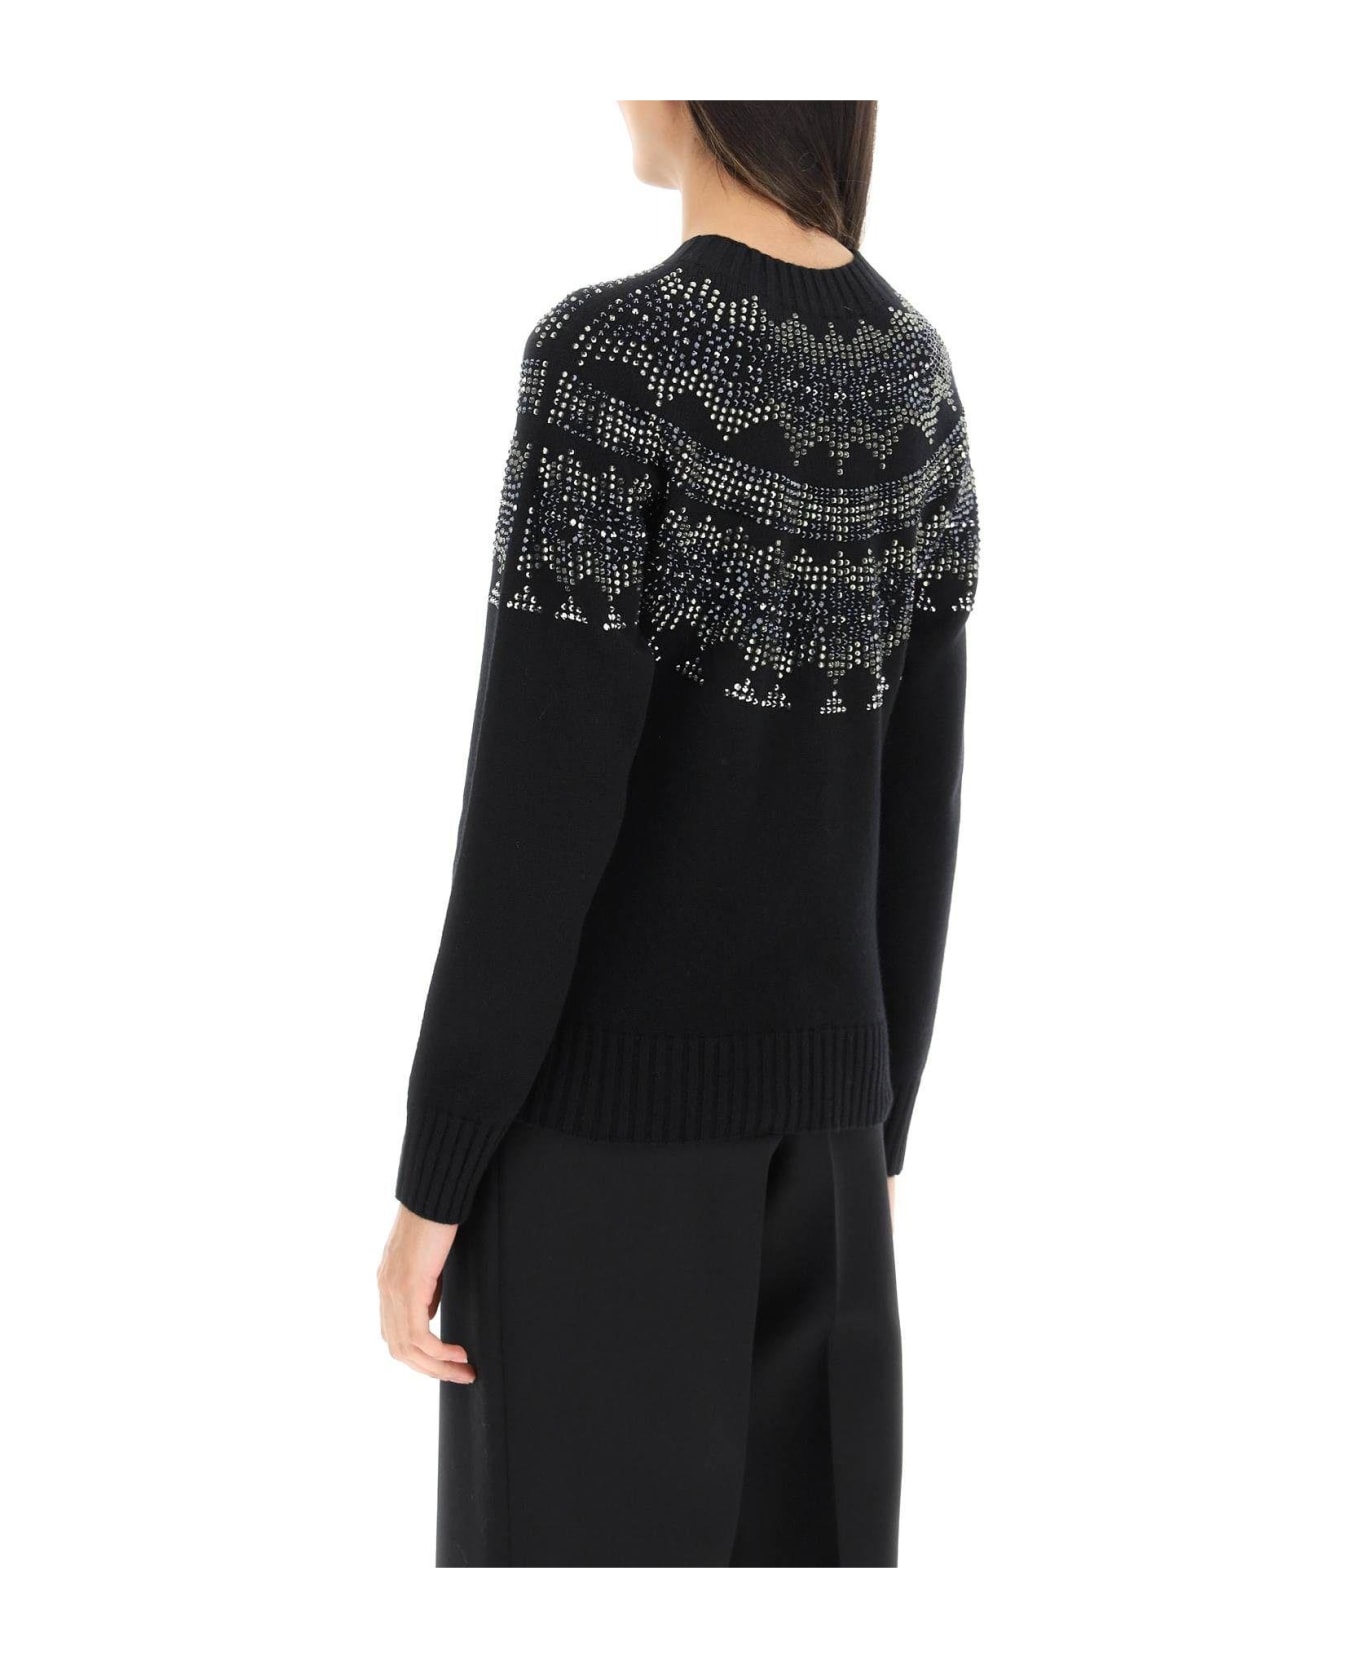 Max Mara 'osmio' Wool And Cashmere Fair-isle Sweater With Crystals - BLACK ニットウェア